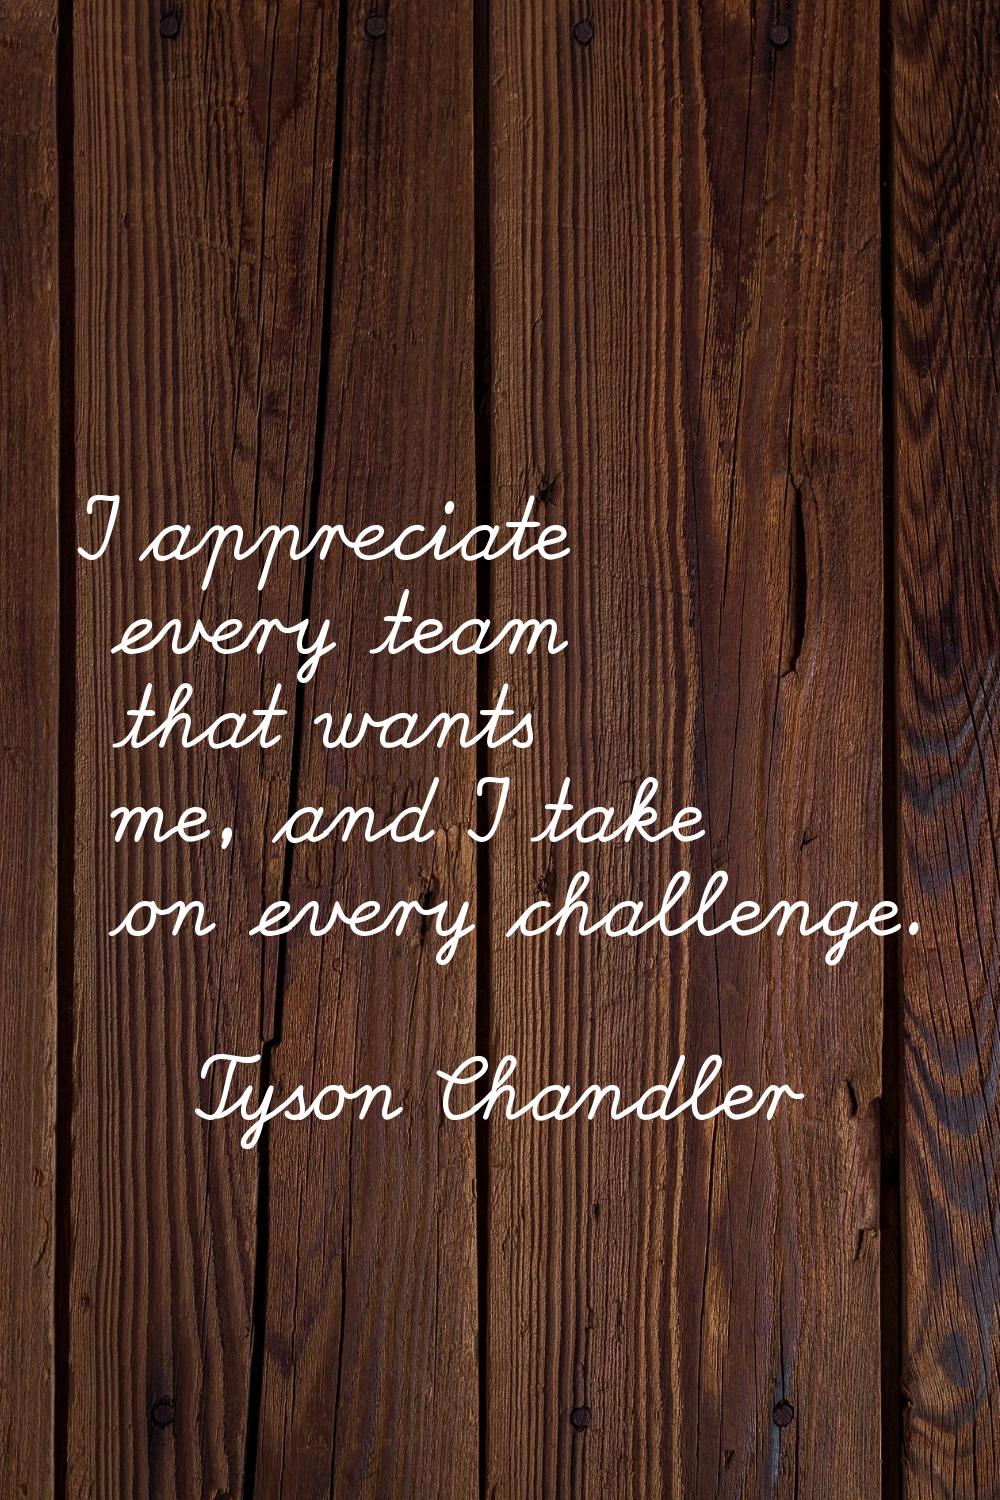 I appreciate every team that wants me, and I take on every challenge.